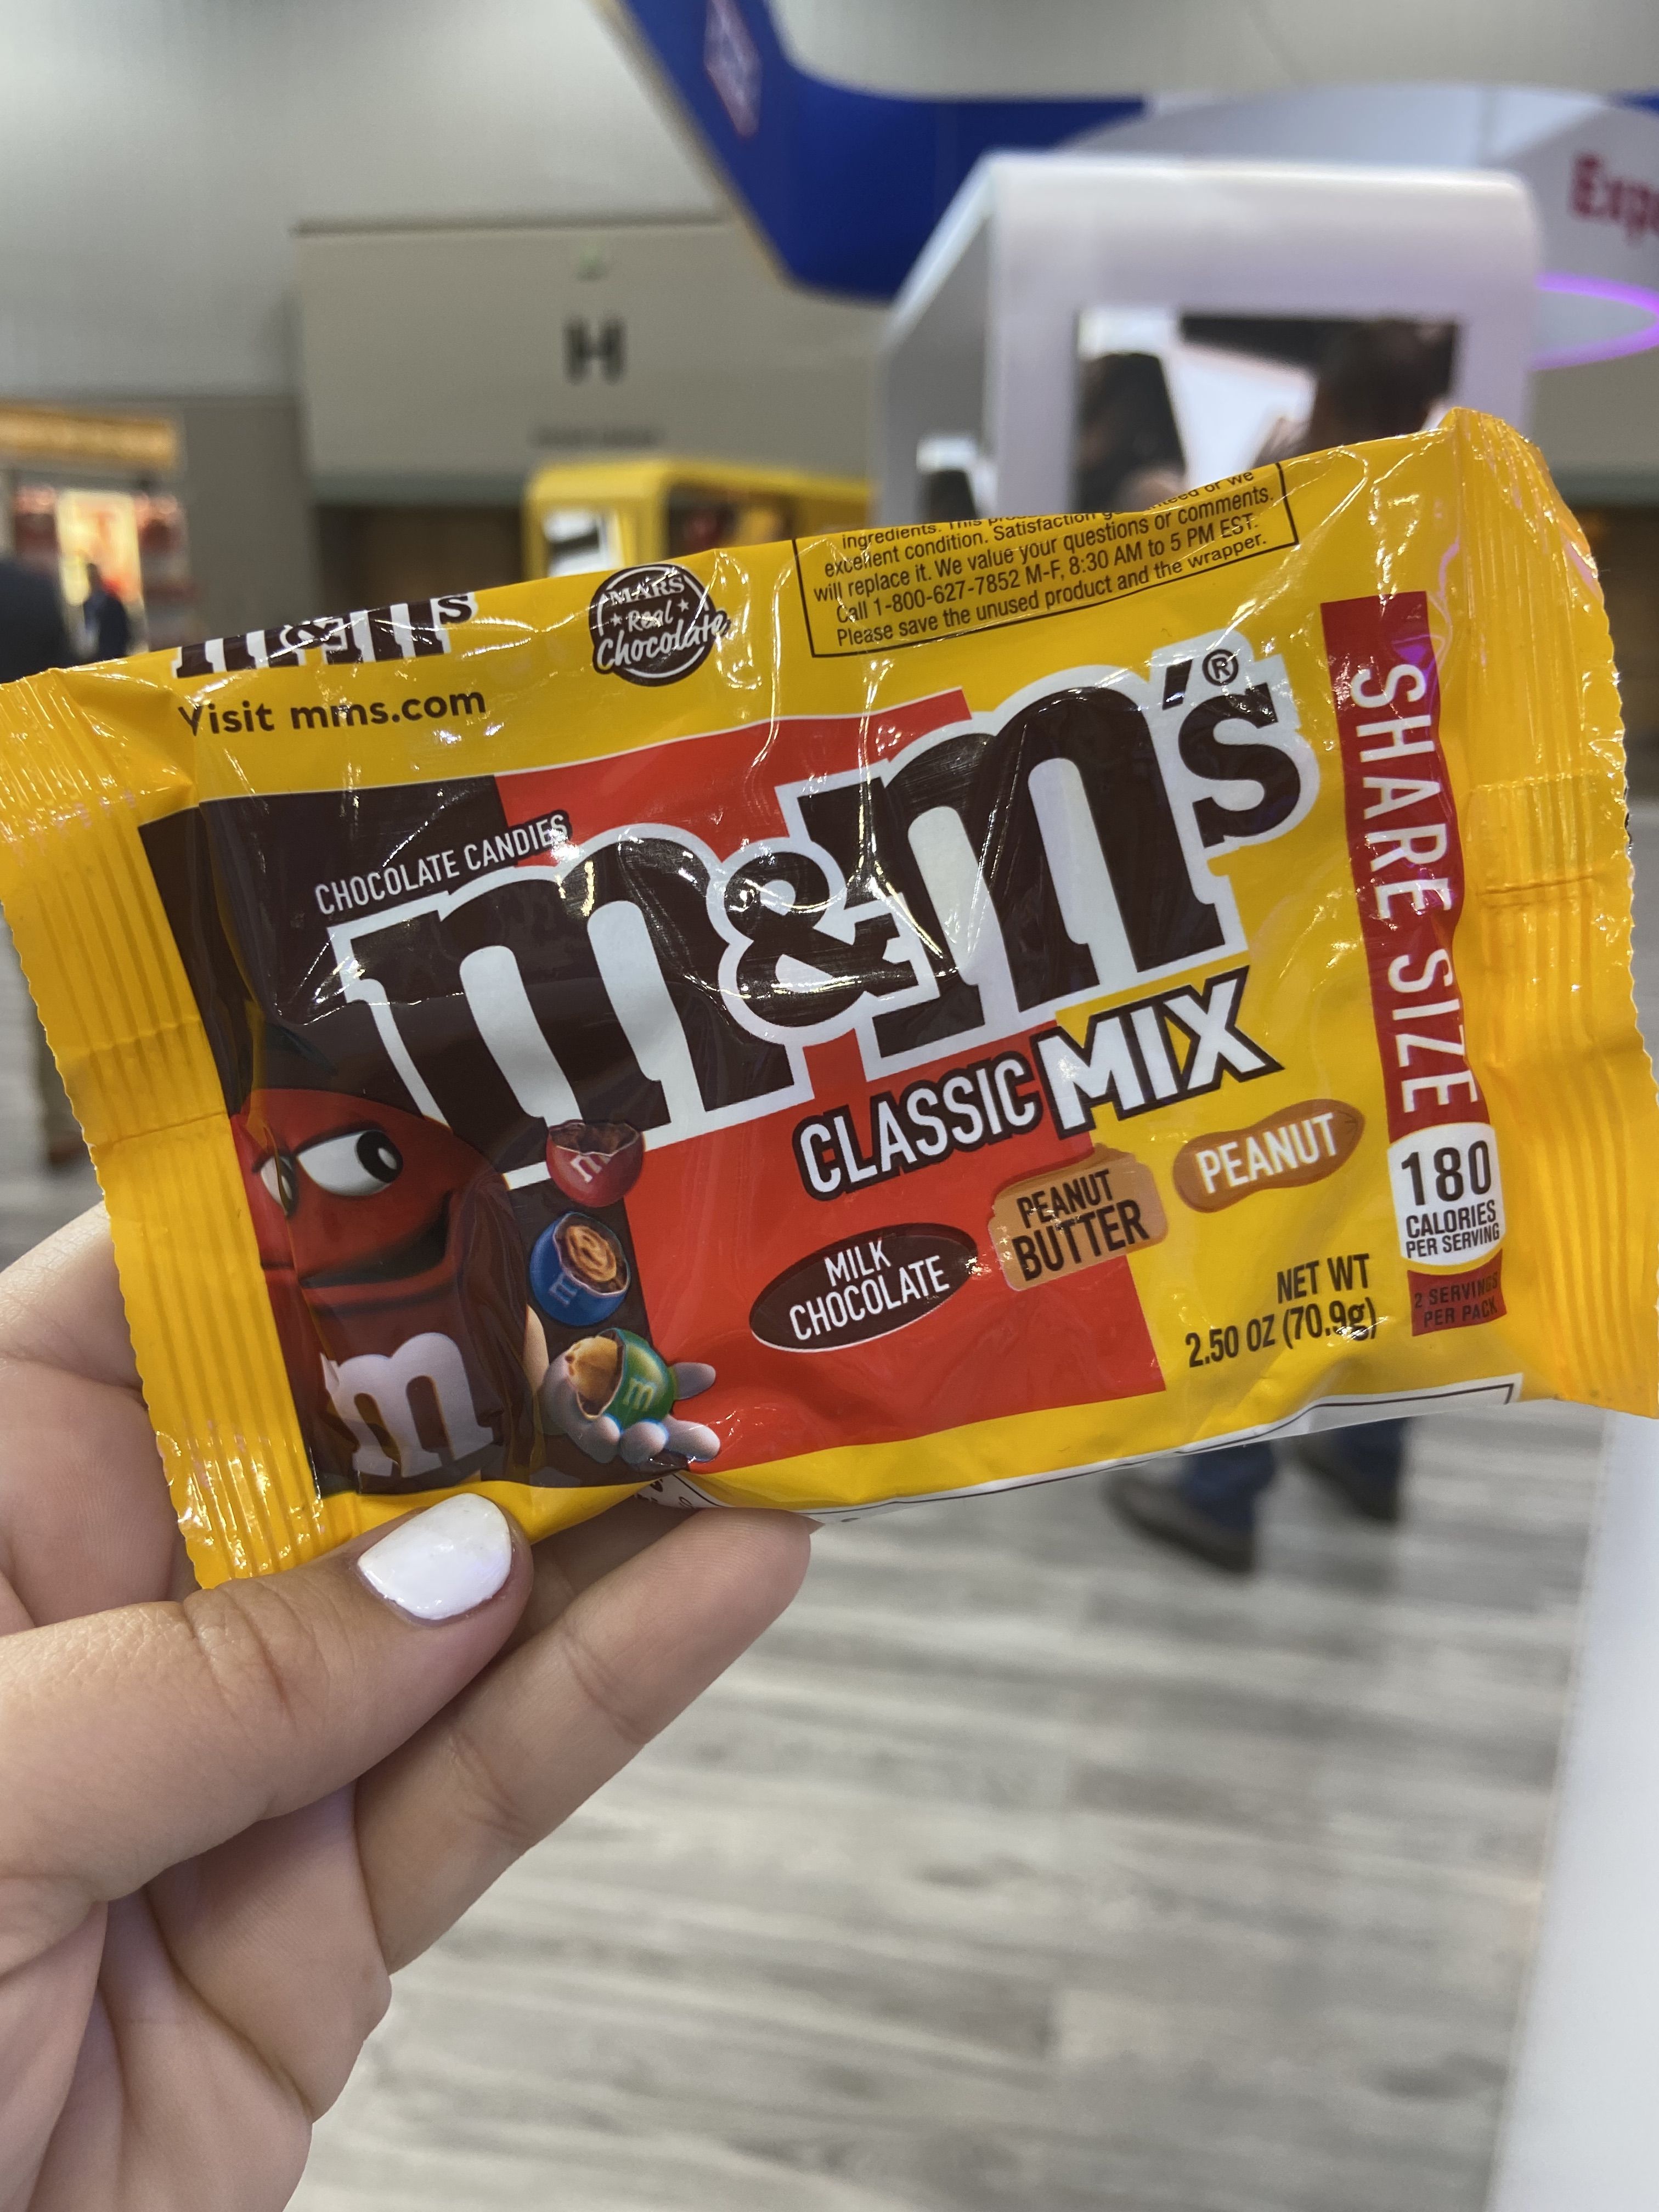 New M&M'S MIX gives candy fans the snack experience they're craving